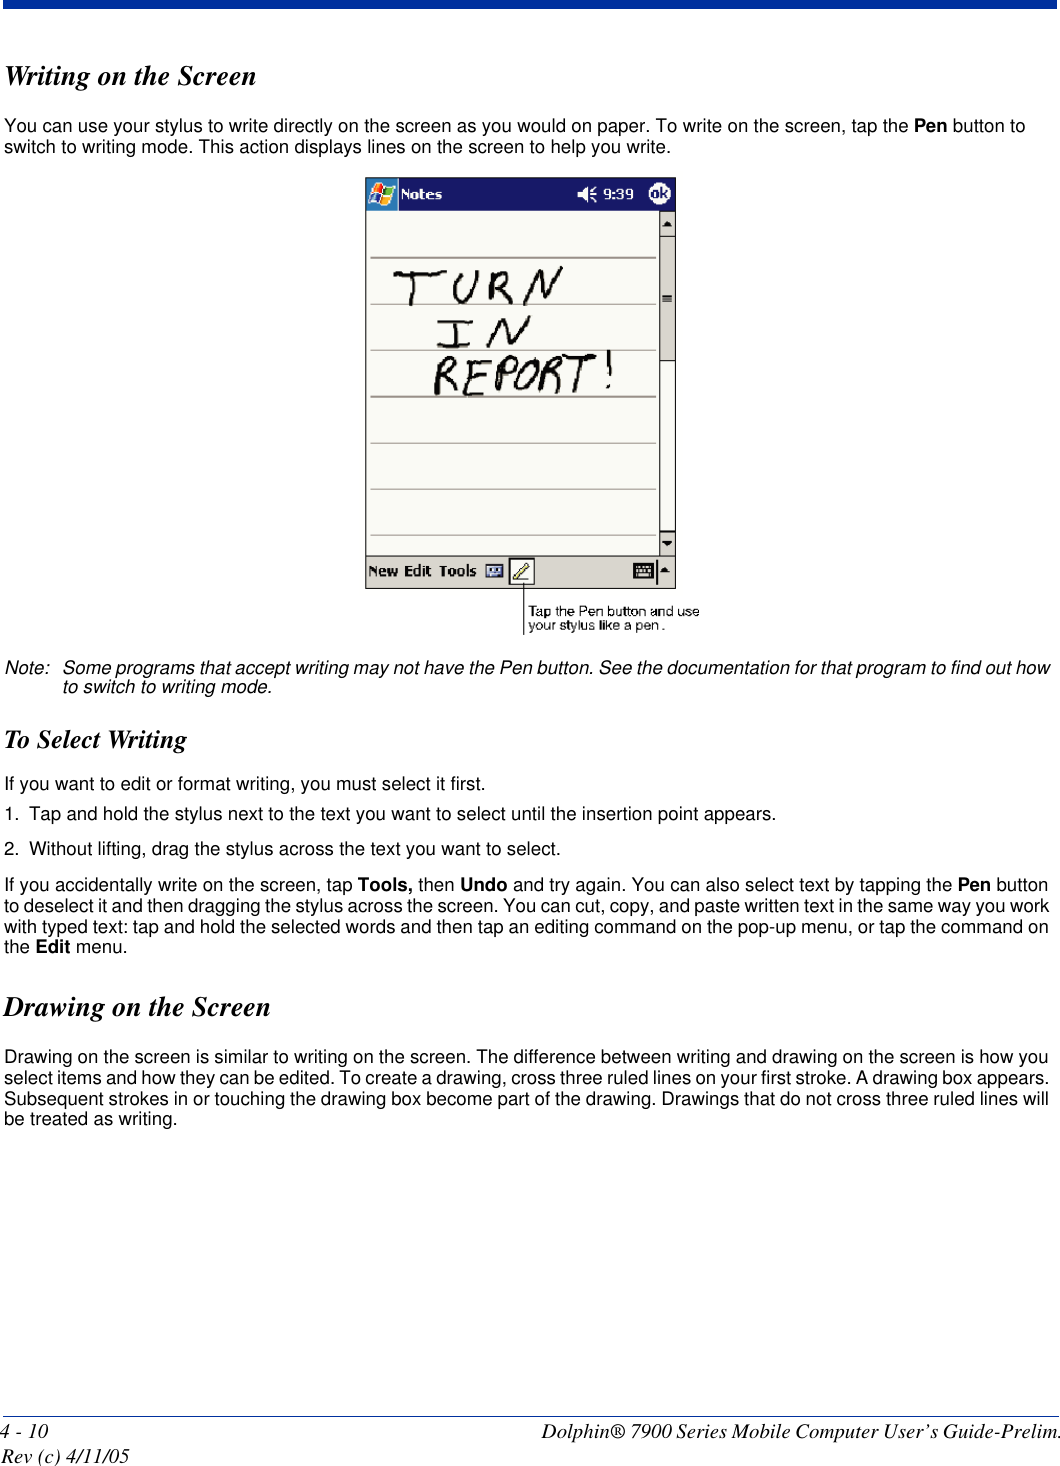 4 - 10 Dolphin® 7900 Series Mobile Computer User’s Guide-Prelim. Rev (c) 4/11/05Writing on the ScreenYou can use your stylus to write directly on the screen as you would on paper. To write on the screen, tap the Pen button to switch to writing mode. This action displays lines on the screen to help you write.Note: Some programs that accept writing may not have the Pen button. See the documentation for that program to find out how to switch to writing mode.To Select WritingIf you want to edit or format writing, you must select it first.1. Tap and hold the stylus next to the text you want to select until the insertion point appears.2. Without lifting, drag the stylus across the text you want to select.If you accidentally write on the screen, tap Tools, then Undo and try again. You can also select text by tapping the Pen button to deselect it and then dragging the stylus across the screen. You can cut, copy, and paste written text in the same way you work with typed text: tap and hold the selected words and then tap an editing command on the pop-up menu, or tap the command on the Edit menu.Drawing on the ScreenDrawing on the screen is similar to writing on the screen. The difference between writing and drawing on the screen is how you select items and how they can be edited. To create a drawing, cross three ruled lines on your first stroke. A drawing box appears. Subsequent strokes in or touching the drawing box become part of the drawing. Drawings that do not cross three ruled lines will be treated as writing.